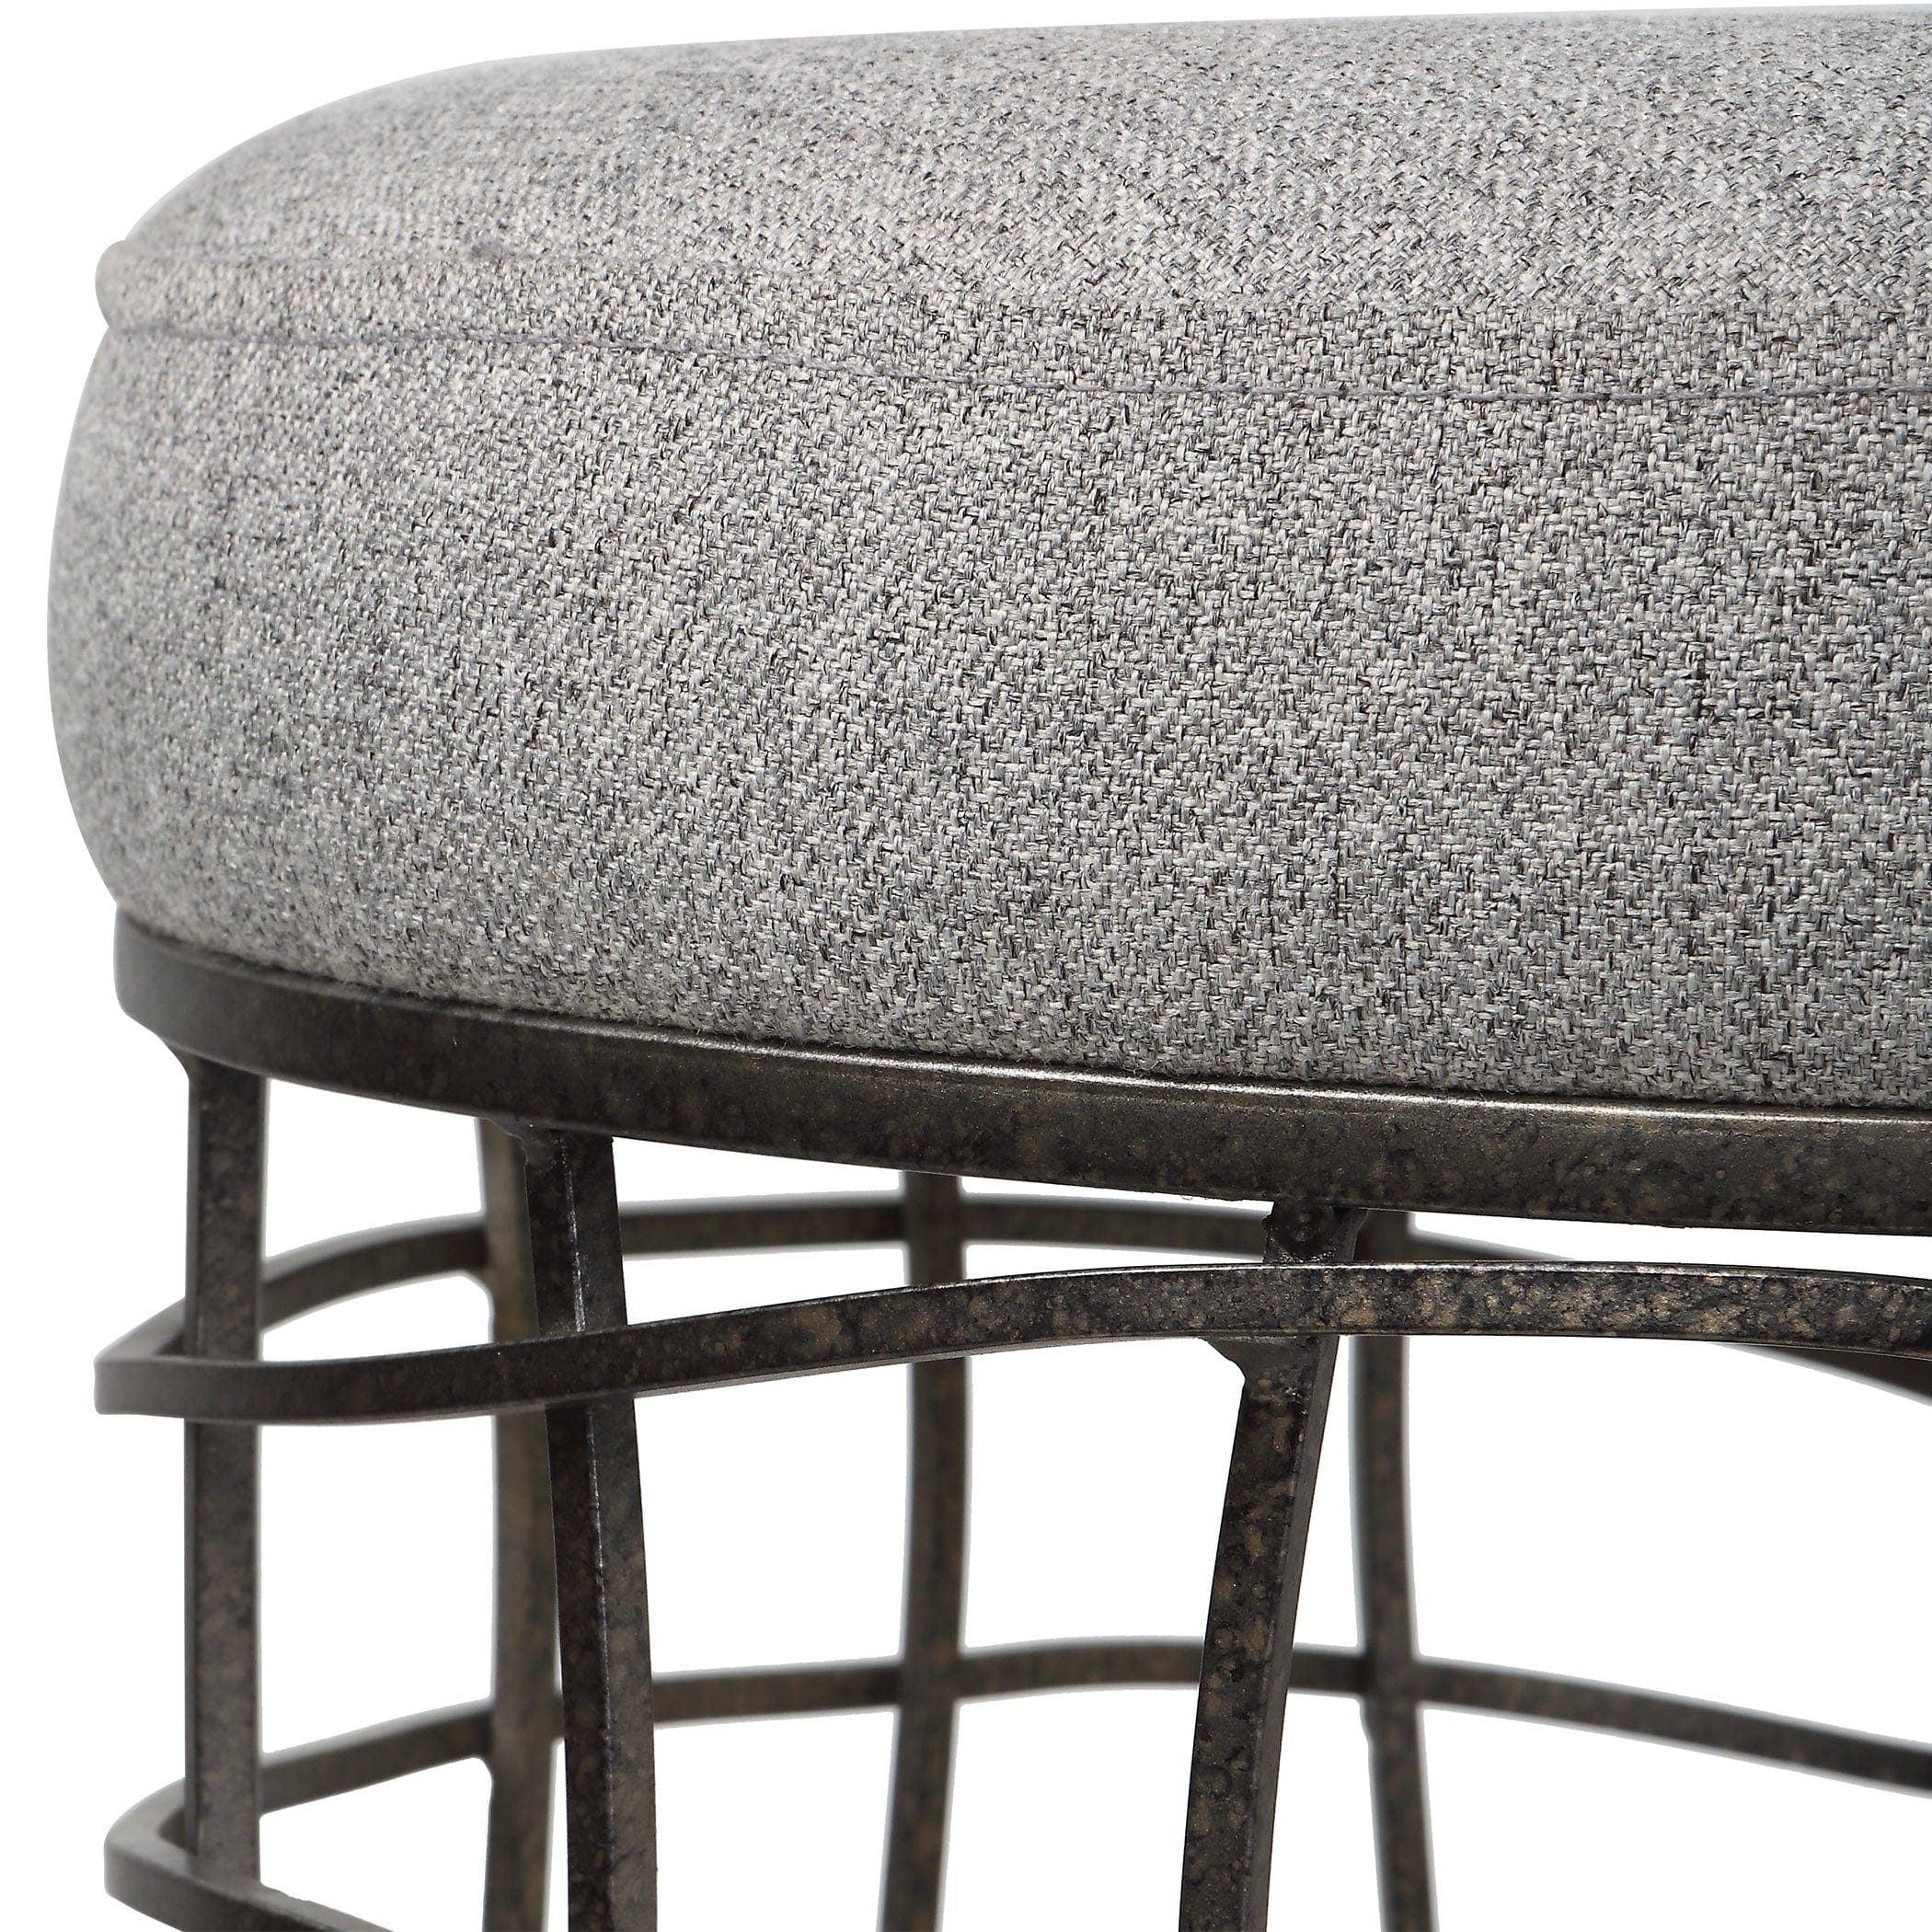 Carnival Iron Round Accent Stool Uttermost